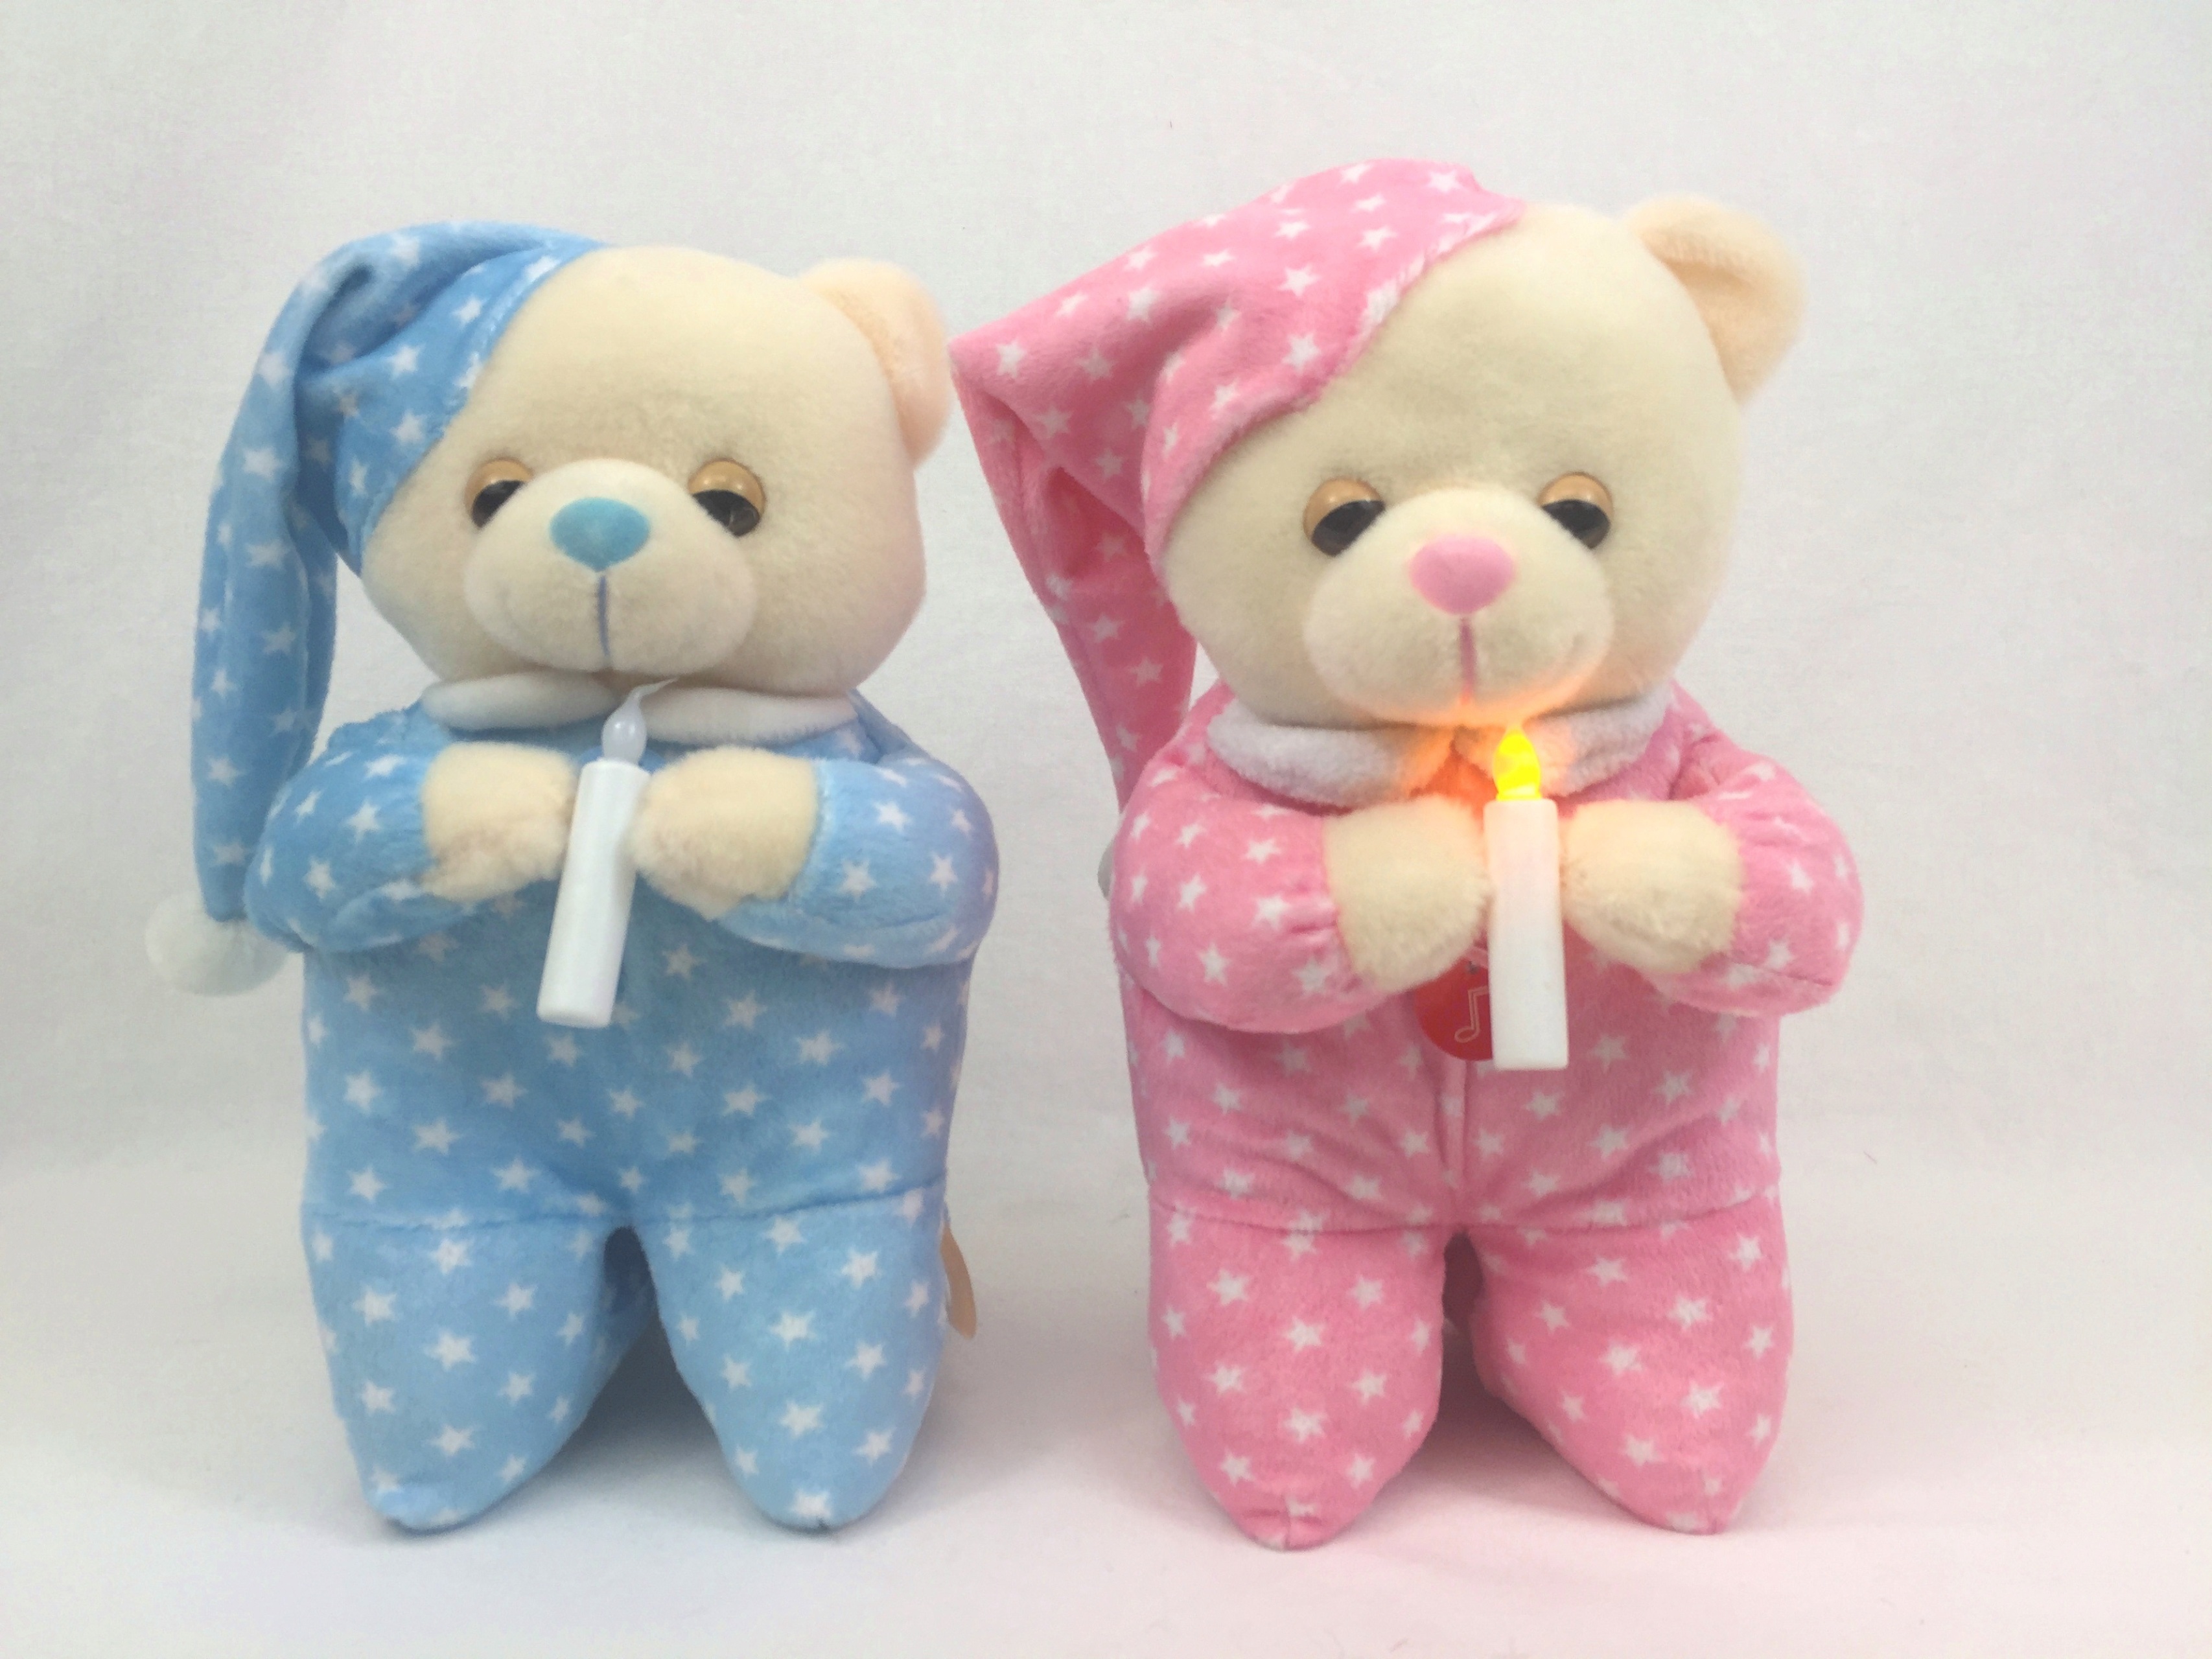 NEW! Blue Talking LORD'S PRAYER Soft Plush  Baby Teddy Bear w/ Light-Up Candle 